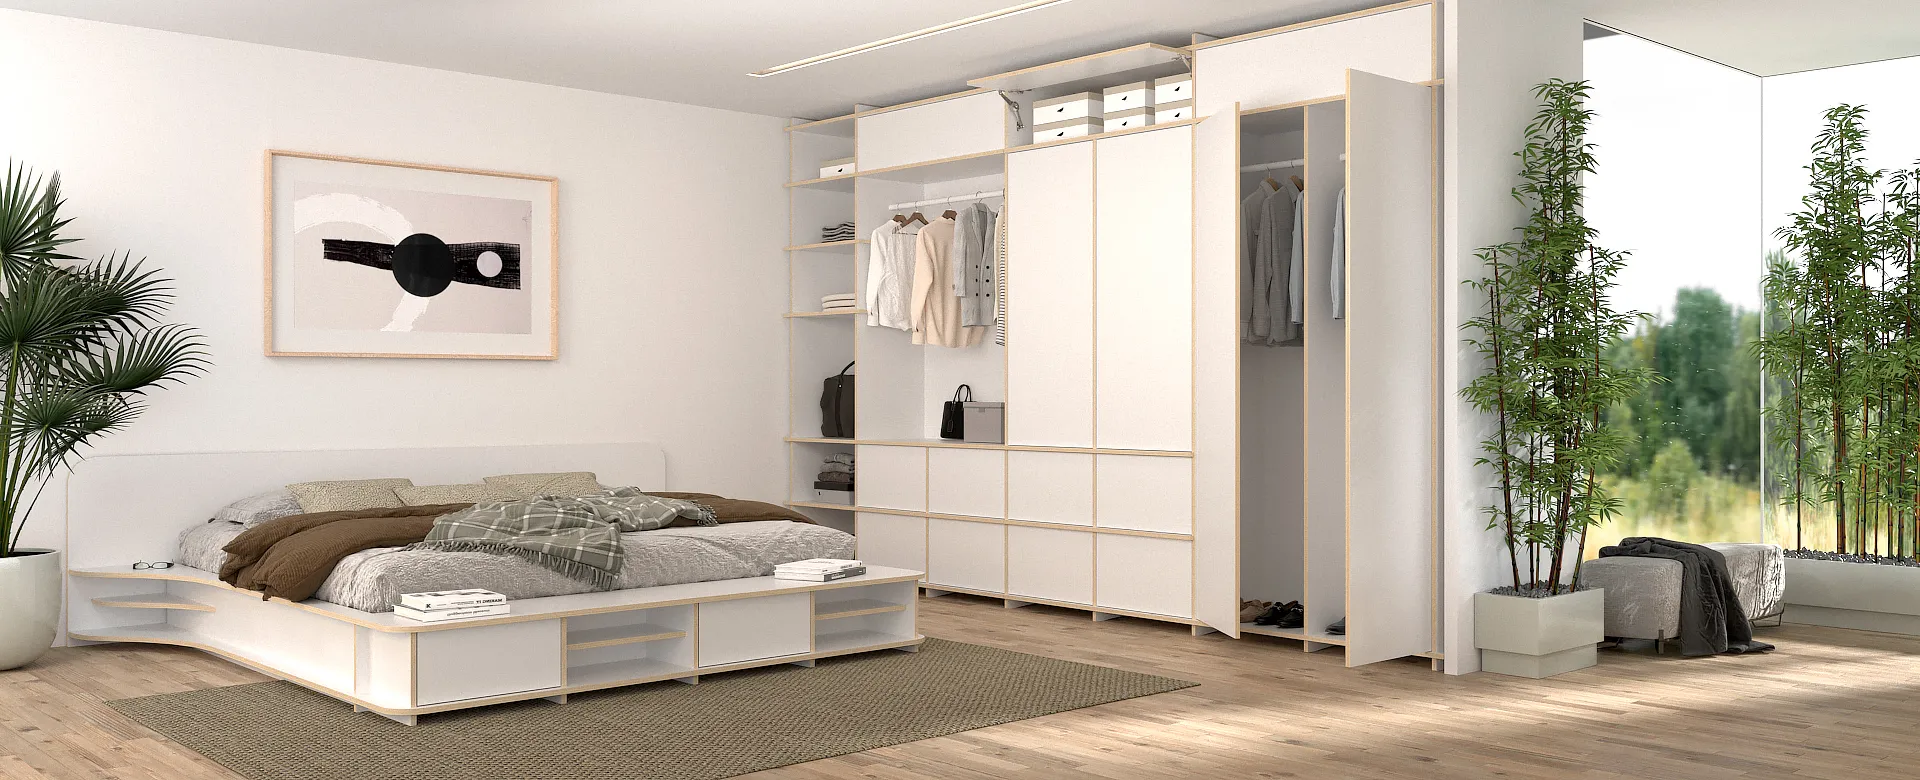 A configurable built-in wardrobe for your home